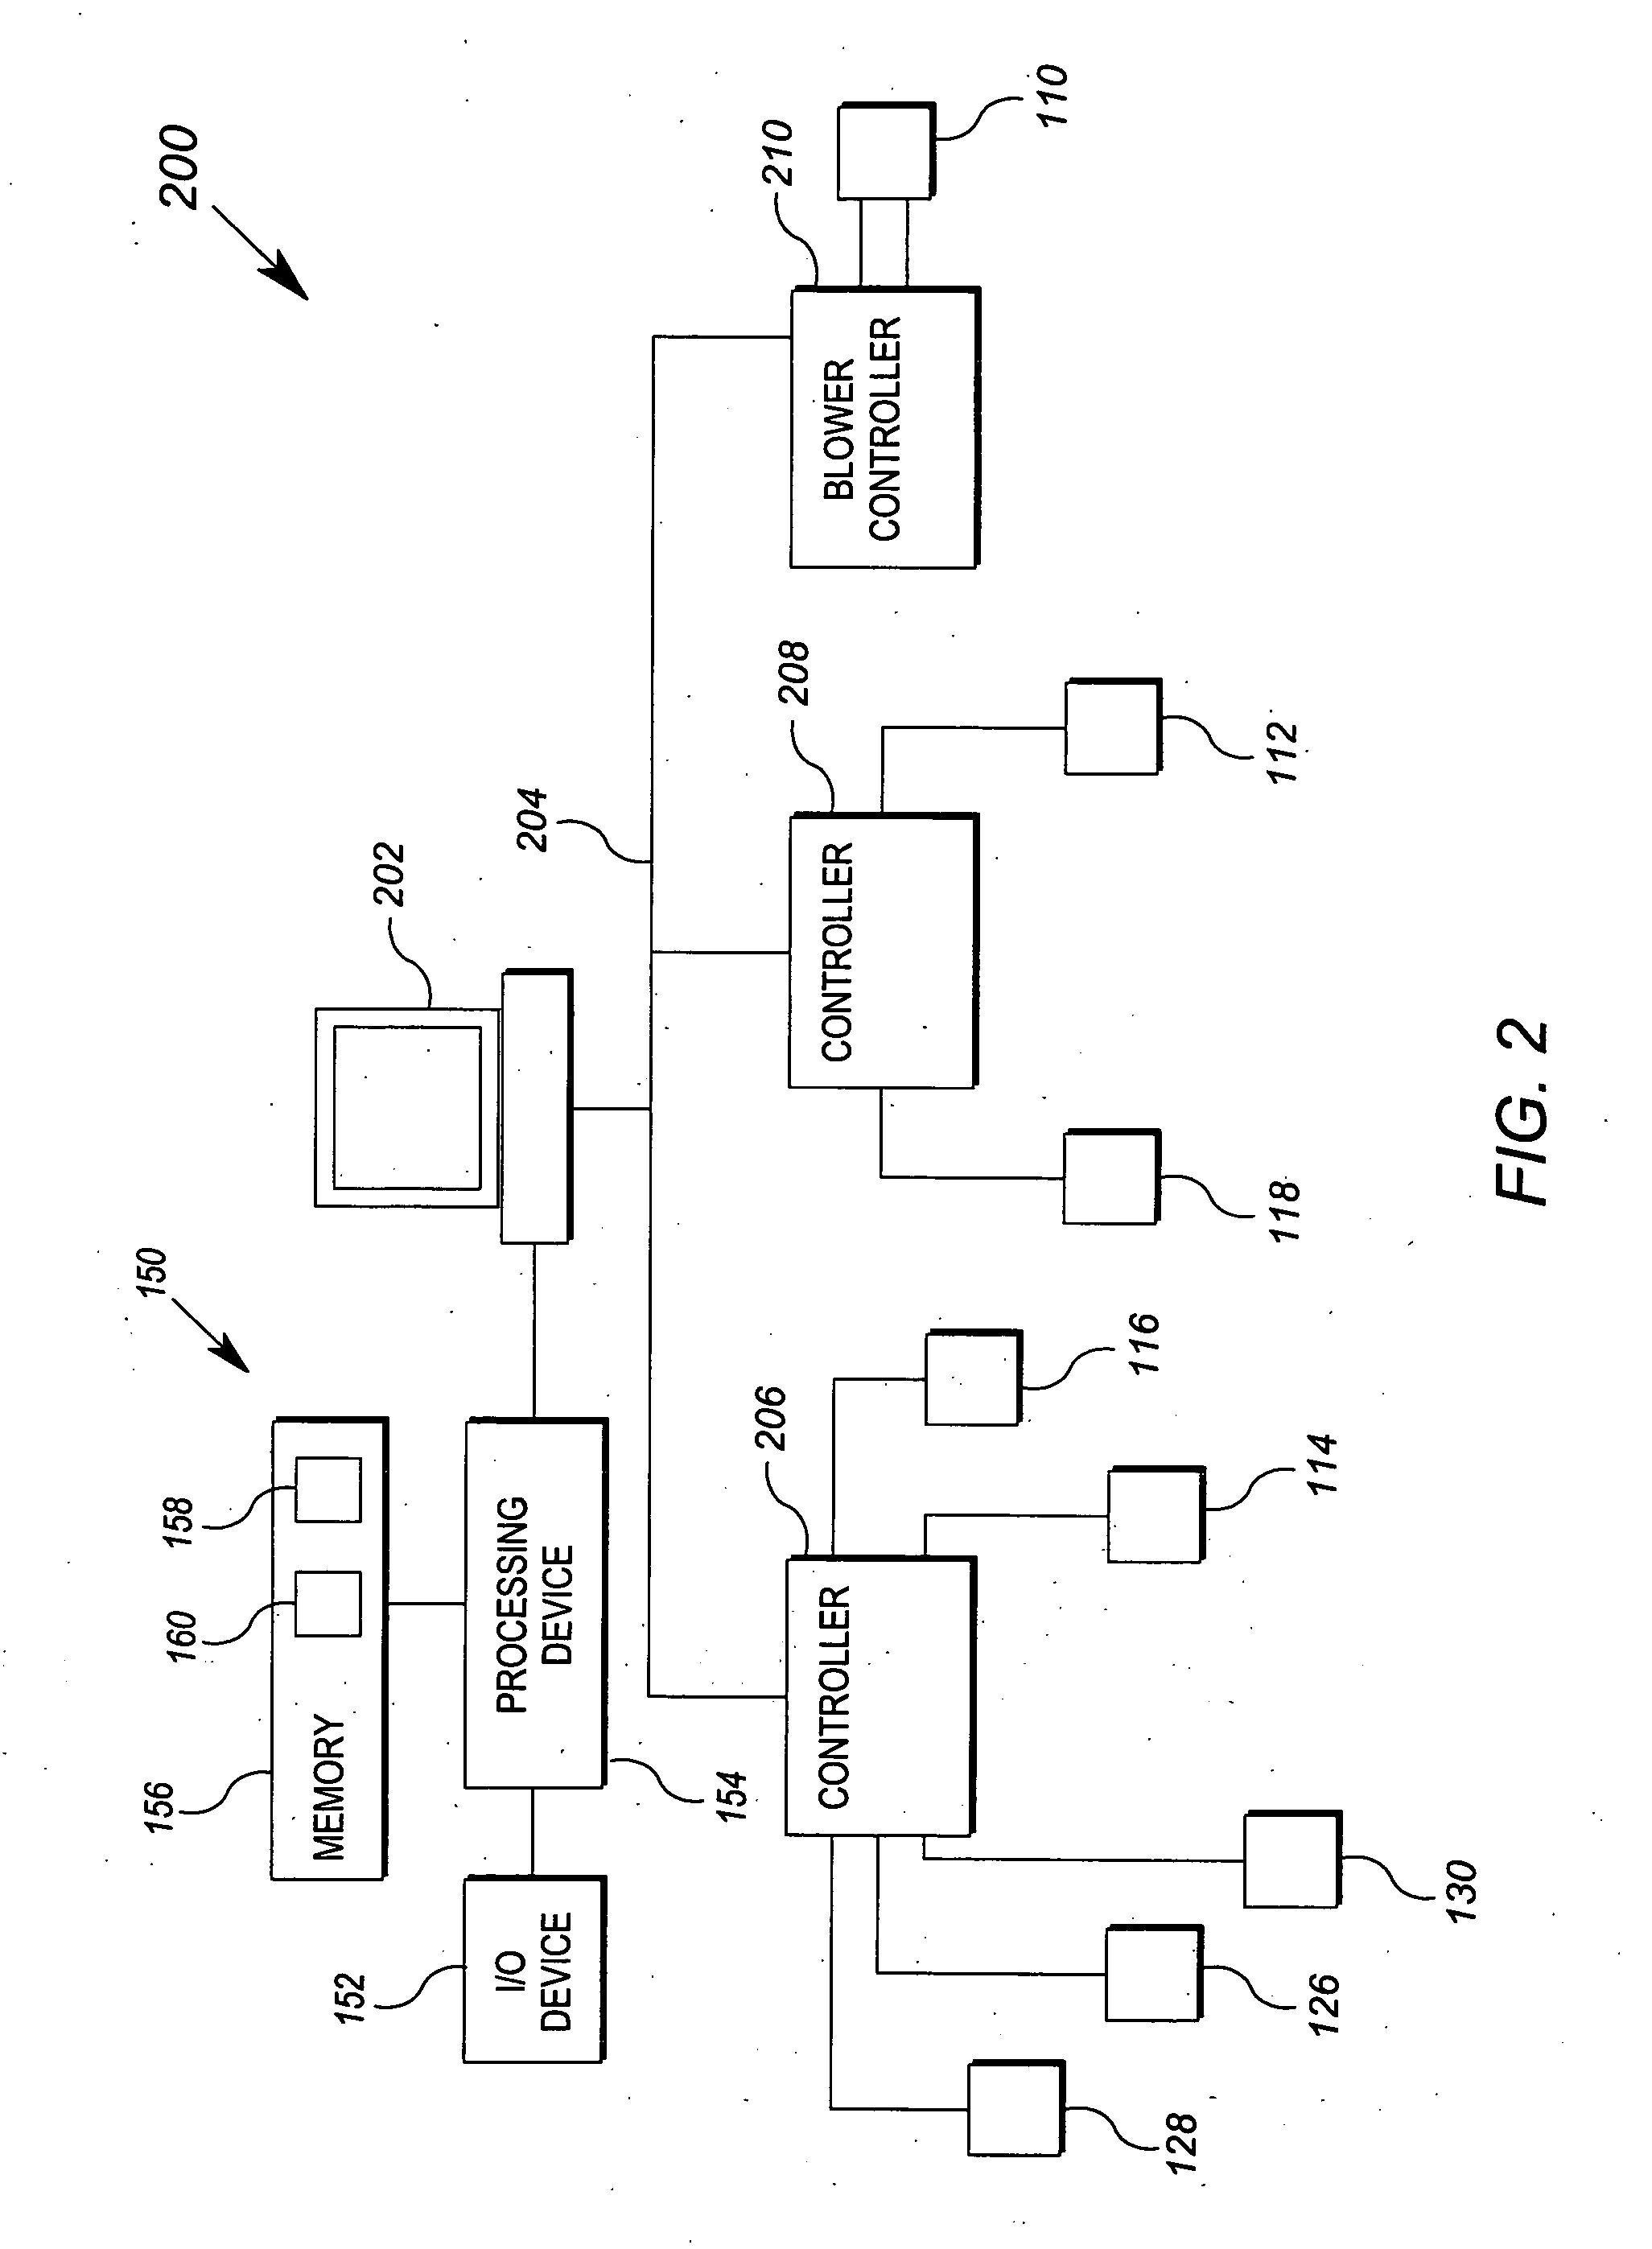 Method and apparatus for accessing a building system model